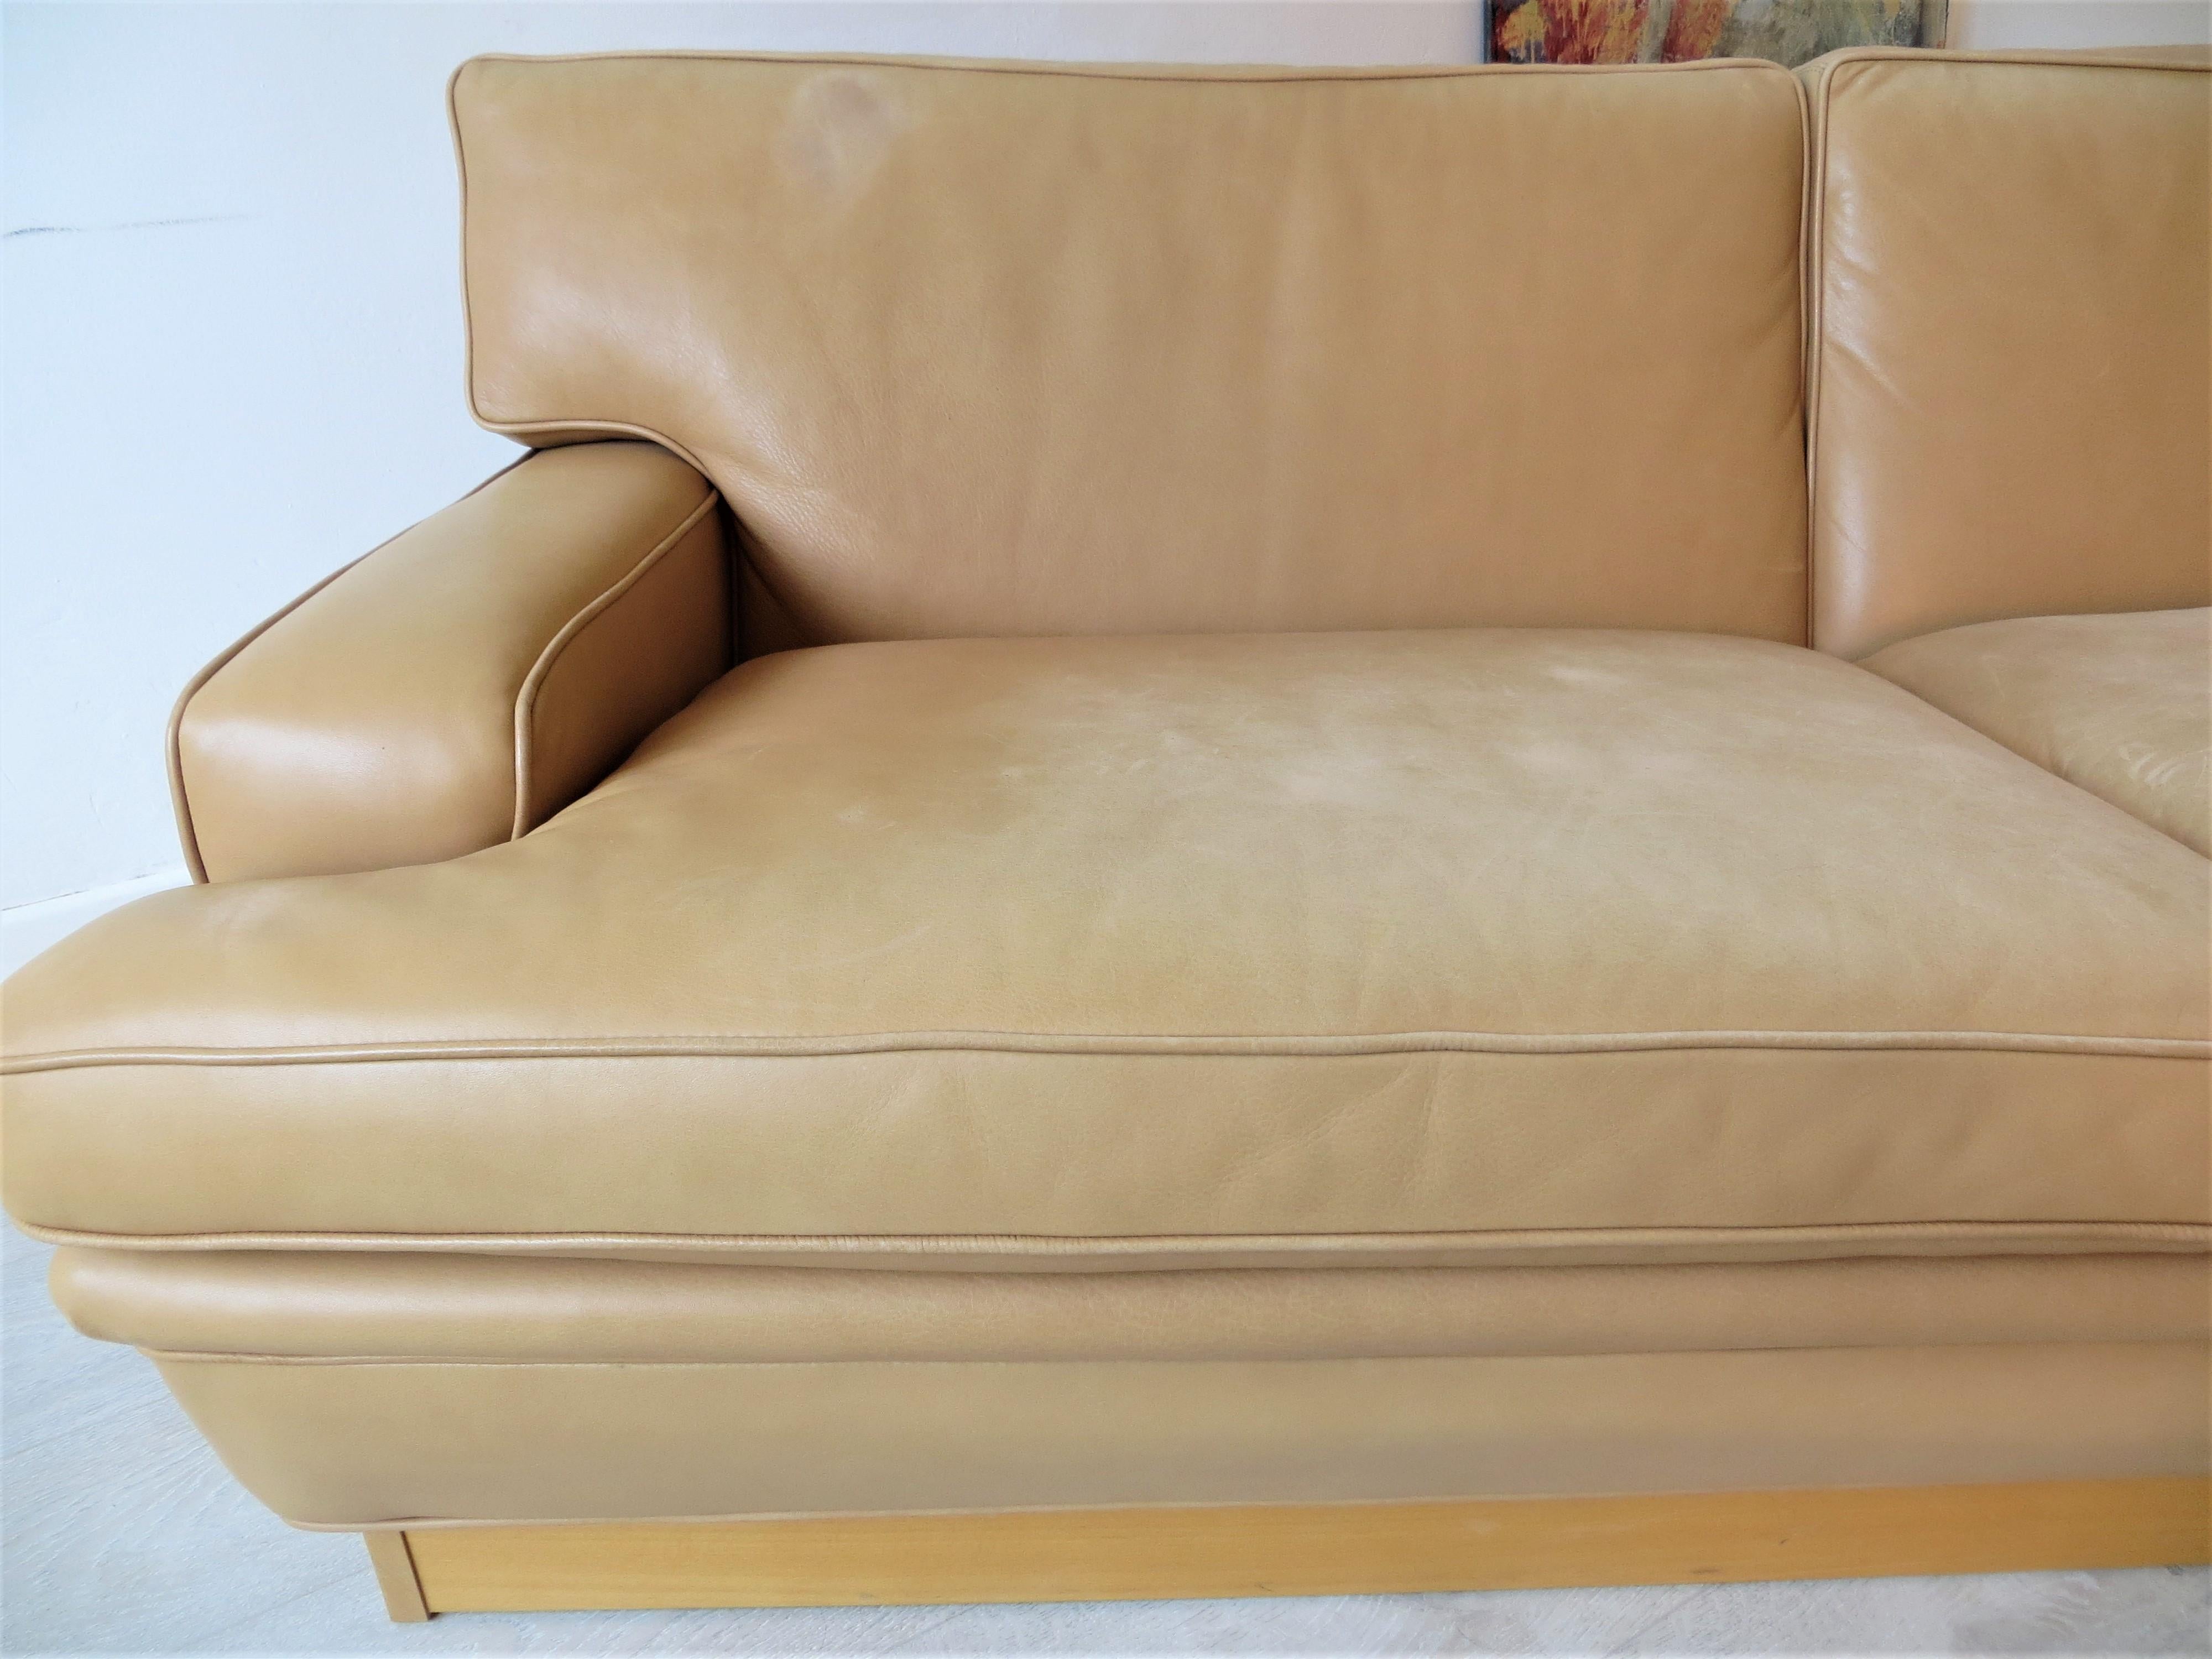 Wood Arne Norell Vintage Leather Merkur Sofa Loveseat in Butterscotch Brown , 1960s For Sale